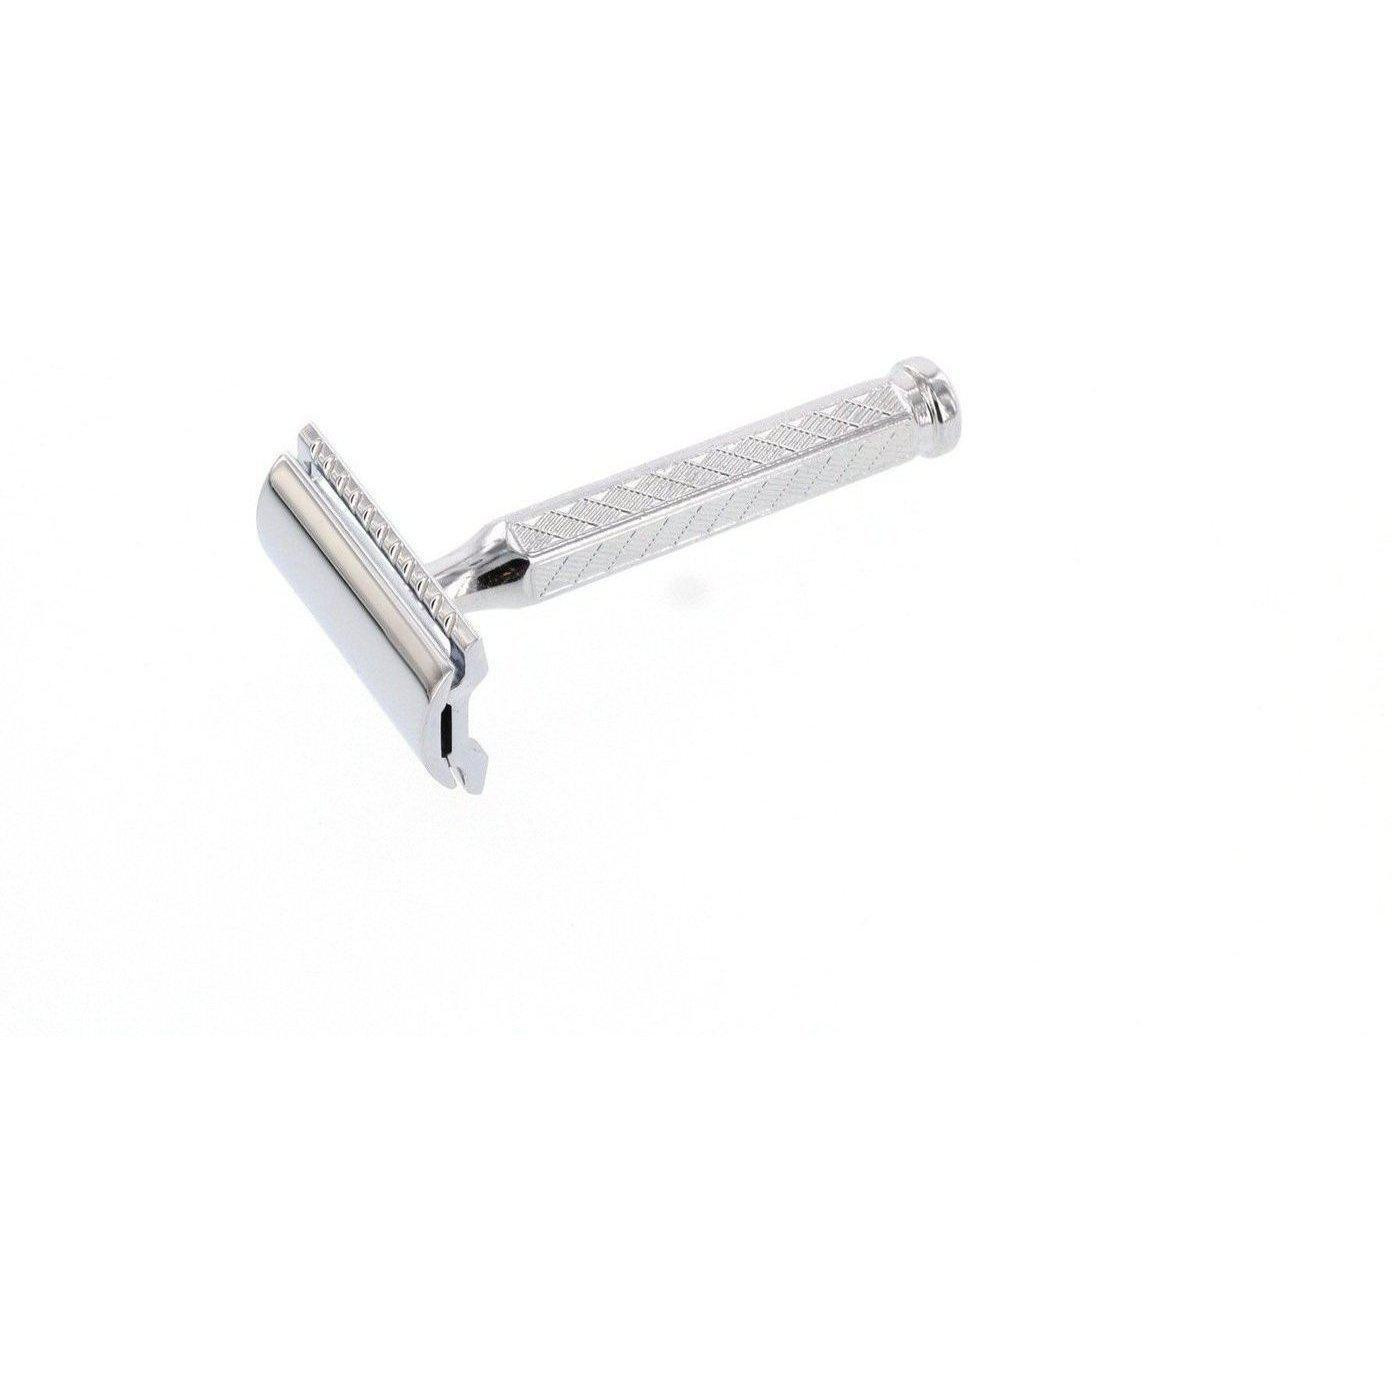 Product image 2 for Merkur Classic 1904 / 1906 Safety Razor with Bar